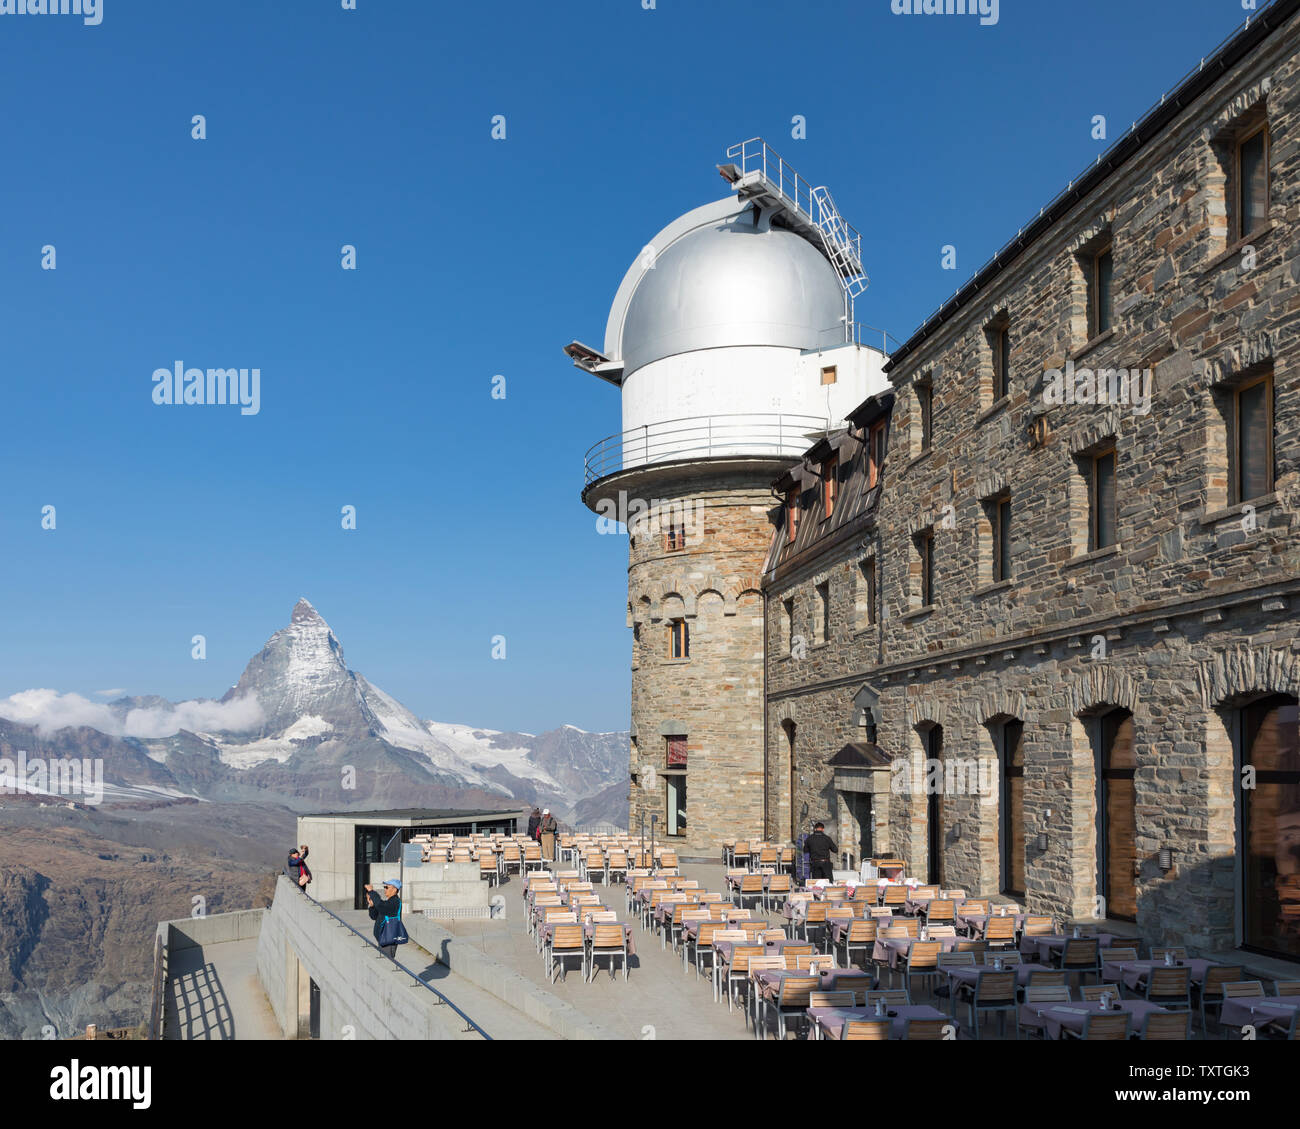 Gornergrat, Valais, Switzerland: beneath an astronomical observatory dome is the terrace of the Kulmhotel, Europe's highest restaurant at 3100m. Stock Photo